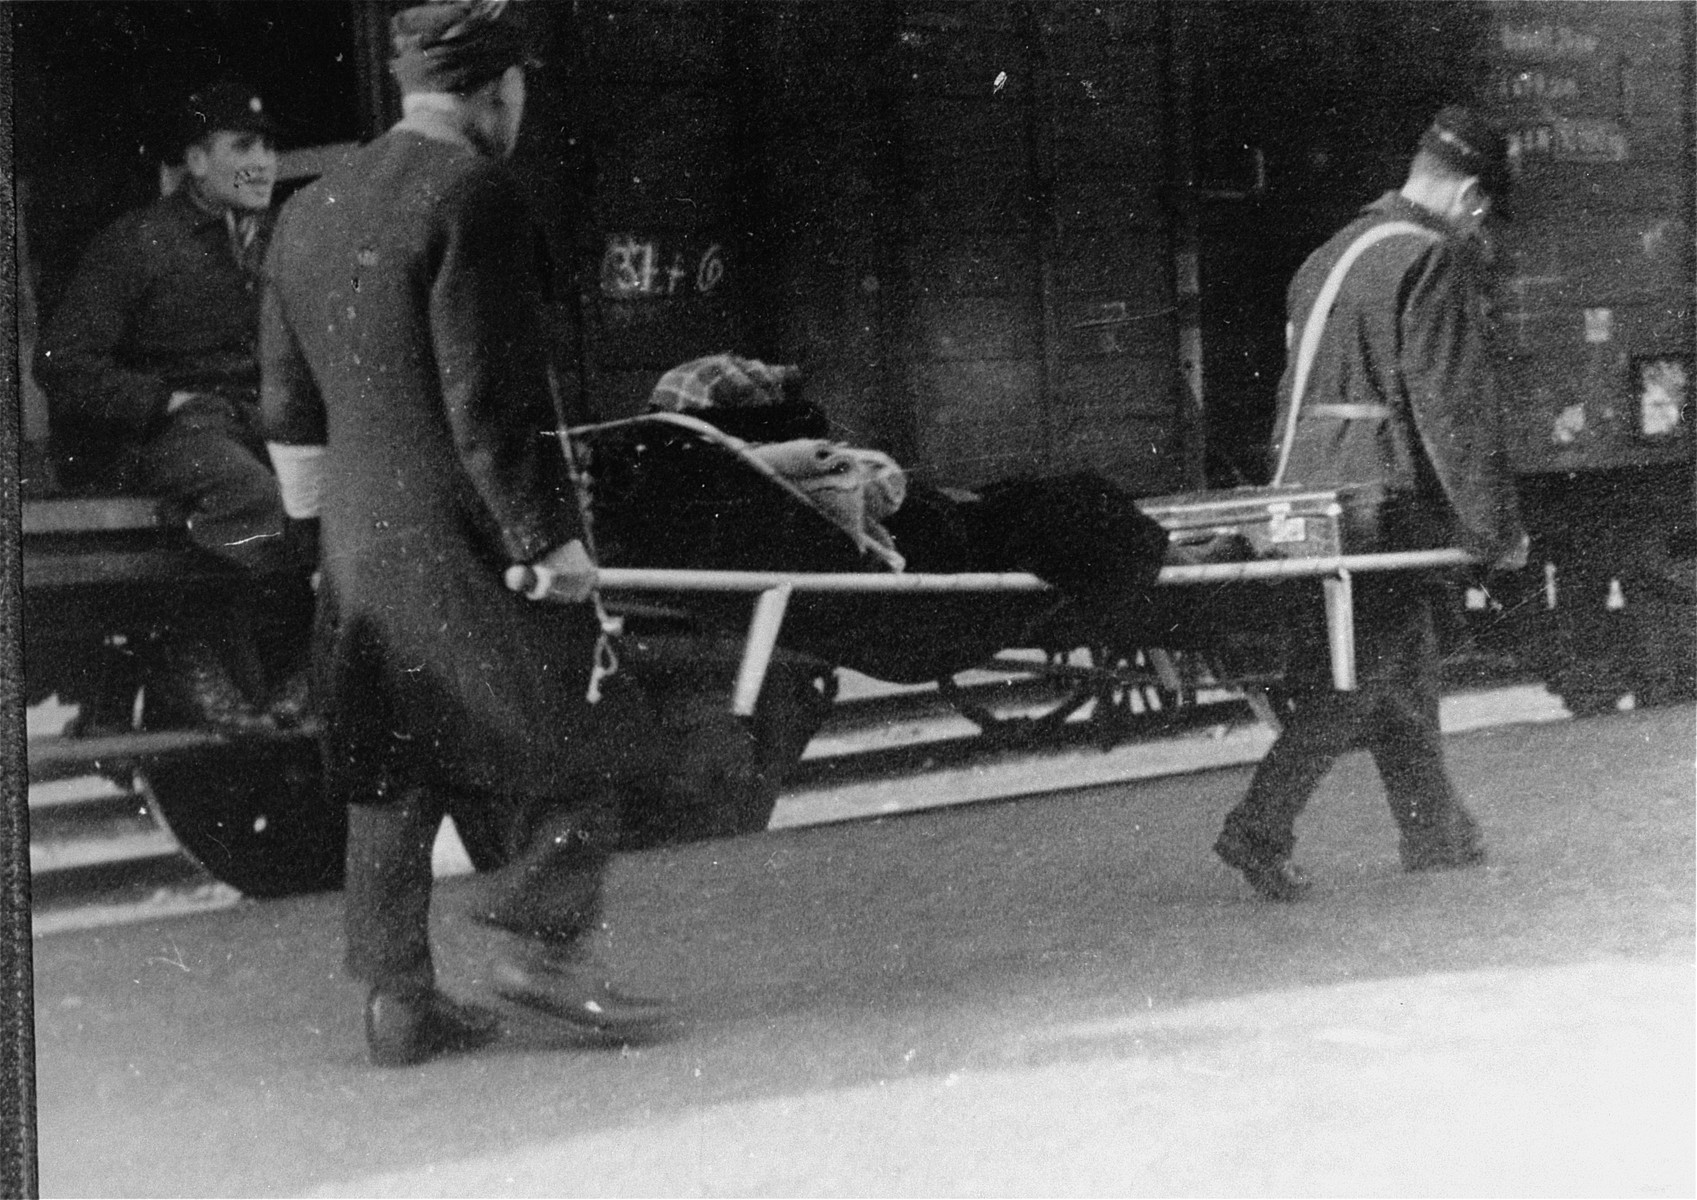 Members of the Ordedienst (Jewish police) assist in the deportation of an elderly woman from Westerbork.